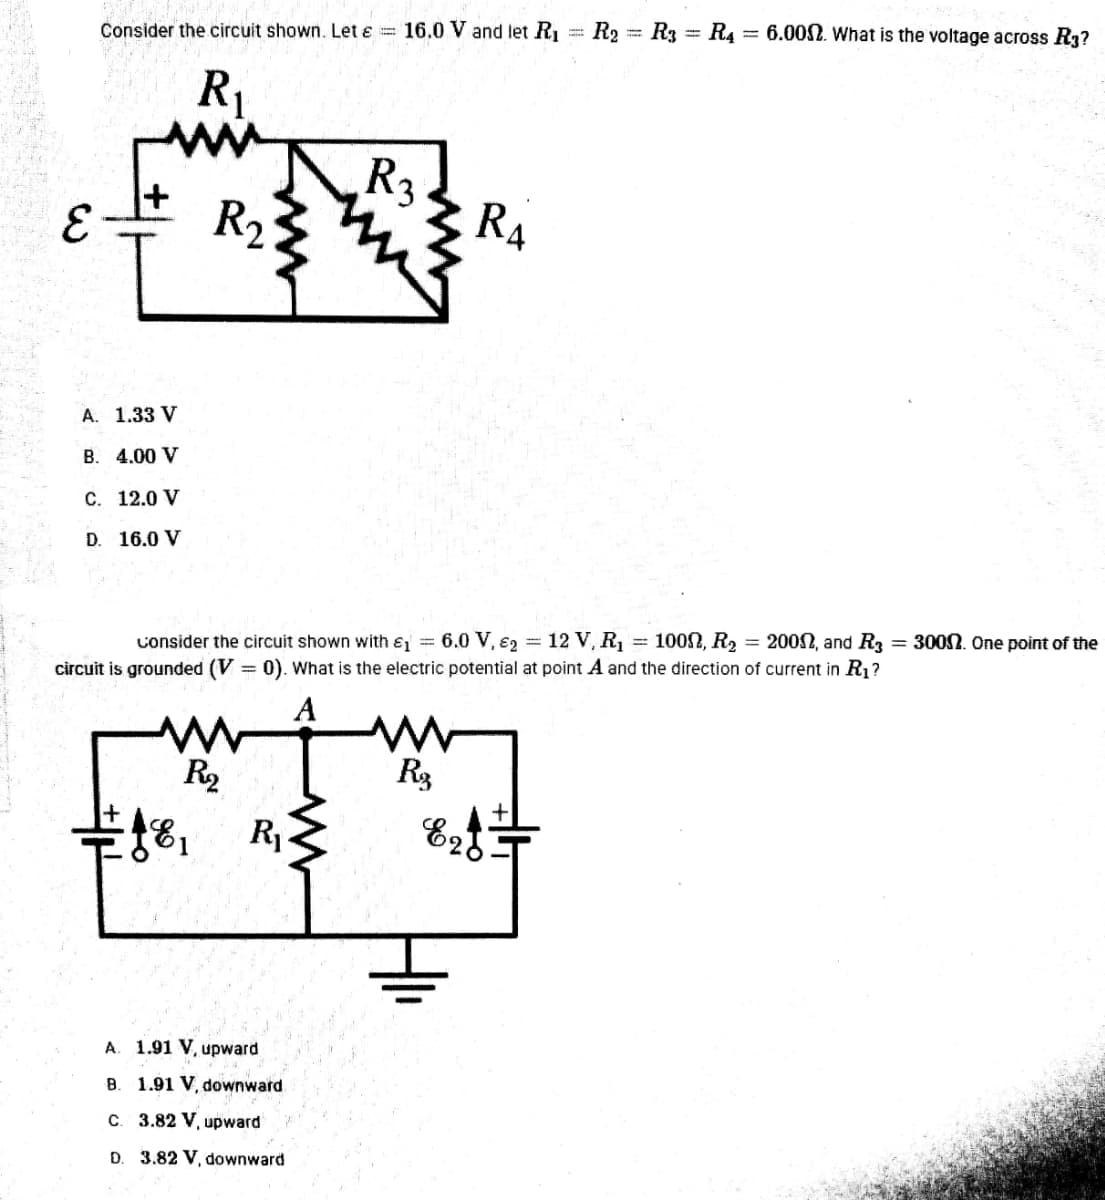 6.00N. What is the voltage across R3?
Consider the circuit shown. Let ɛ = 16.0 V and let R1 = R2 = R3 = R4
R1
ww
R3
+
R2
RA
A. 1.33 V
B. 4.00 V
C. 12.0 V
D. 16.0 V
100N, R2 = 2002, and R3 = 300N. One point of the
consider the circuit shown with ɛ = 6.0 V, €2 = 12 V, R1
circuit is grounded (V = 0). What is the electric potential at point A and the direction of current in R1?
A
R2
R1
E25
A. 1.91 V, upward
B. 1.91 V, downward
C. 3.82 V, upward
D. 3.82 V, downward
